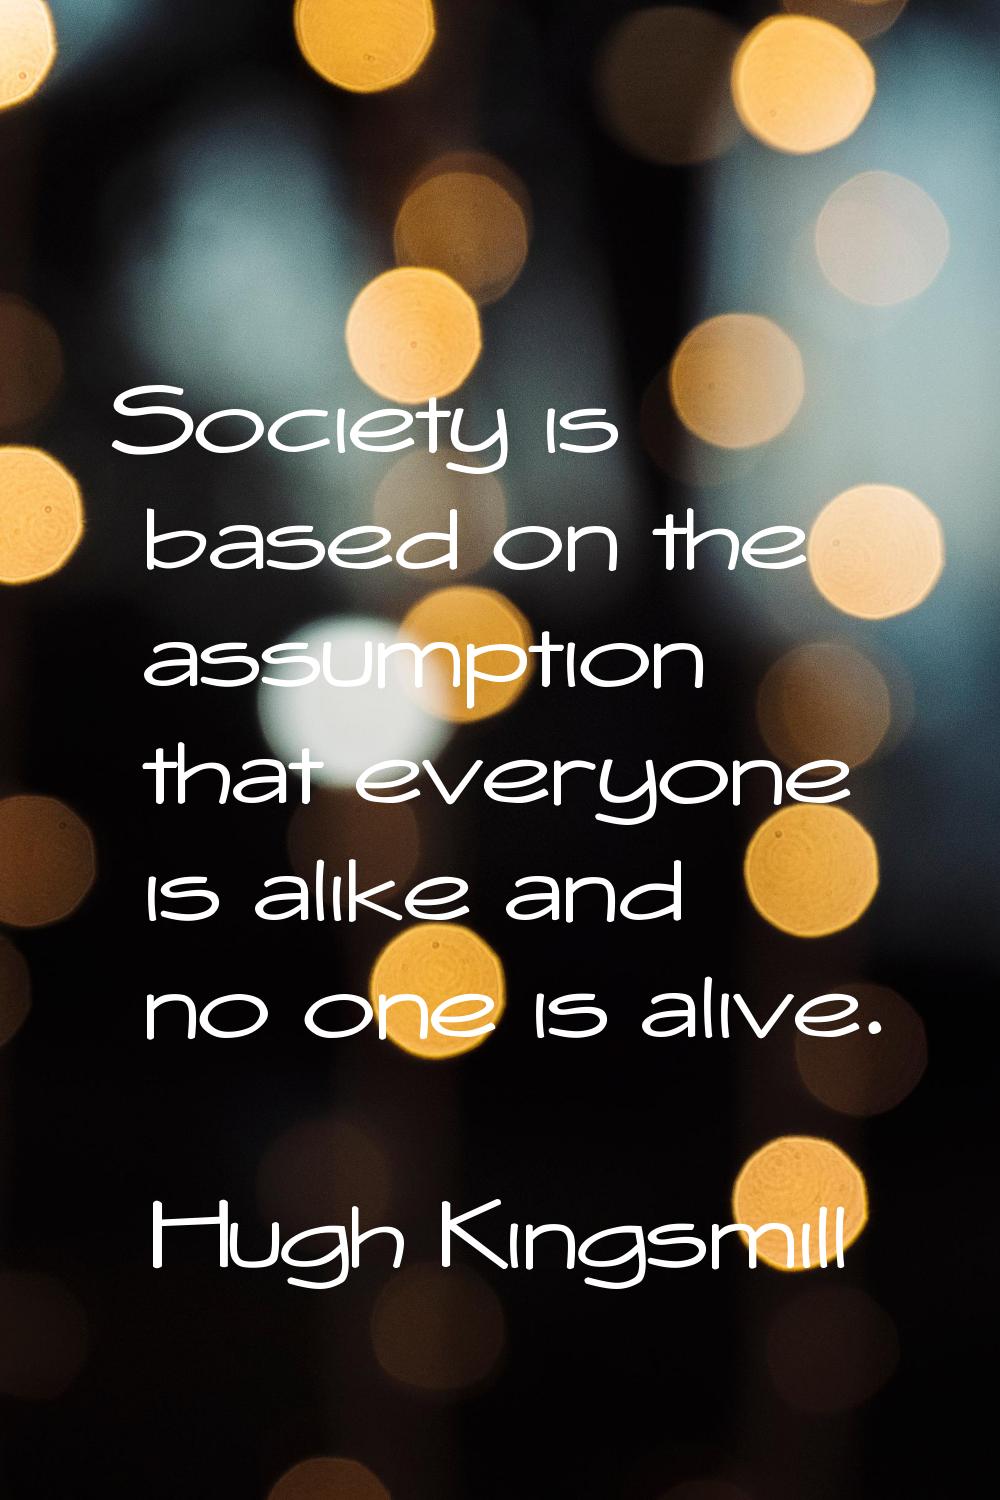 Society is based on the assumption that everyone is alike and no one is alive.